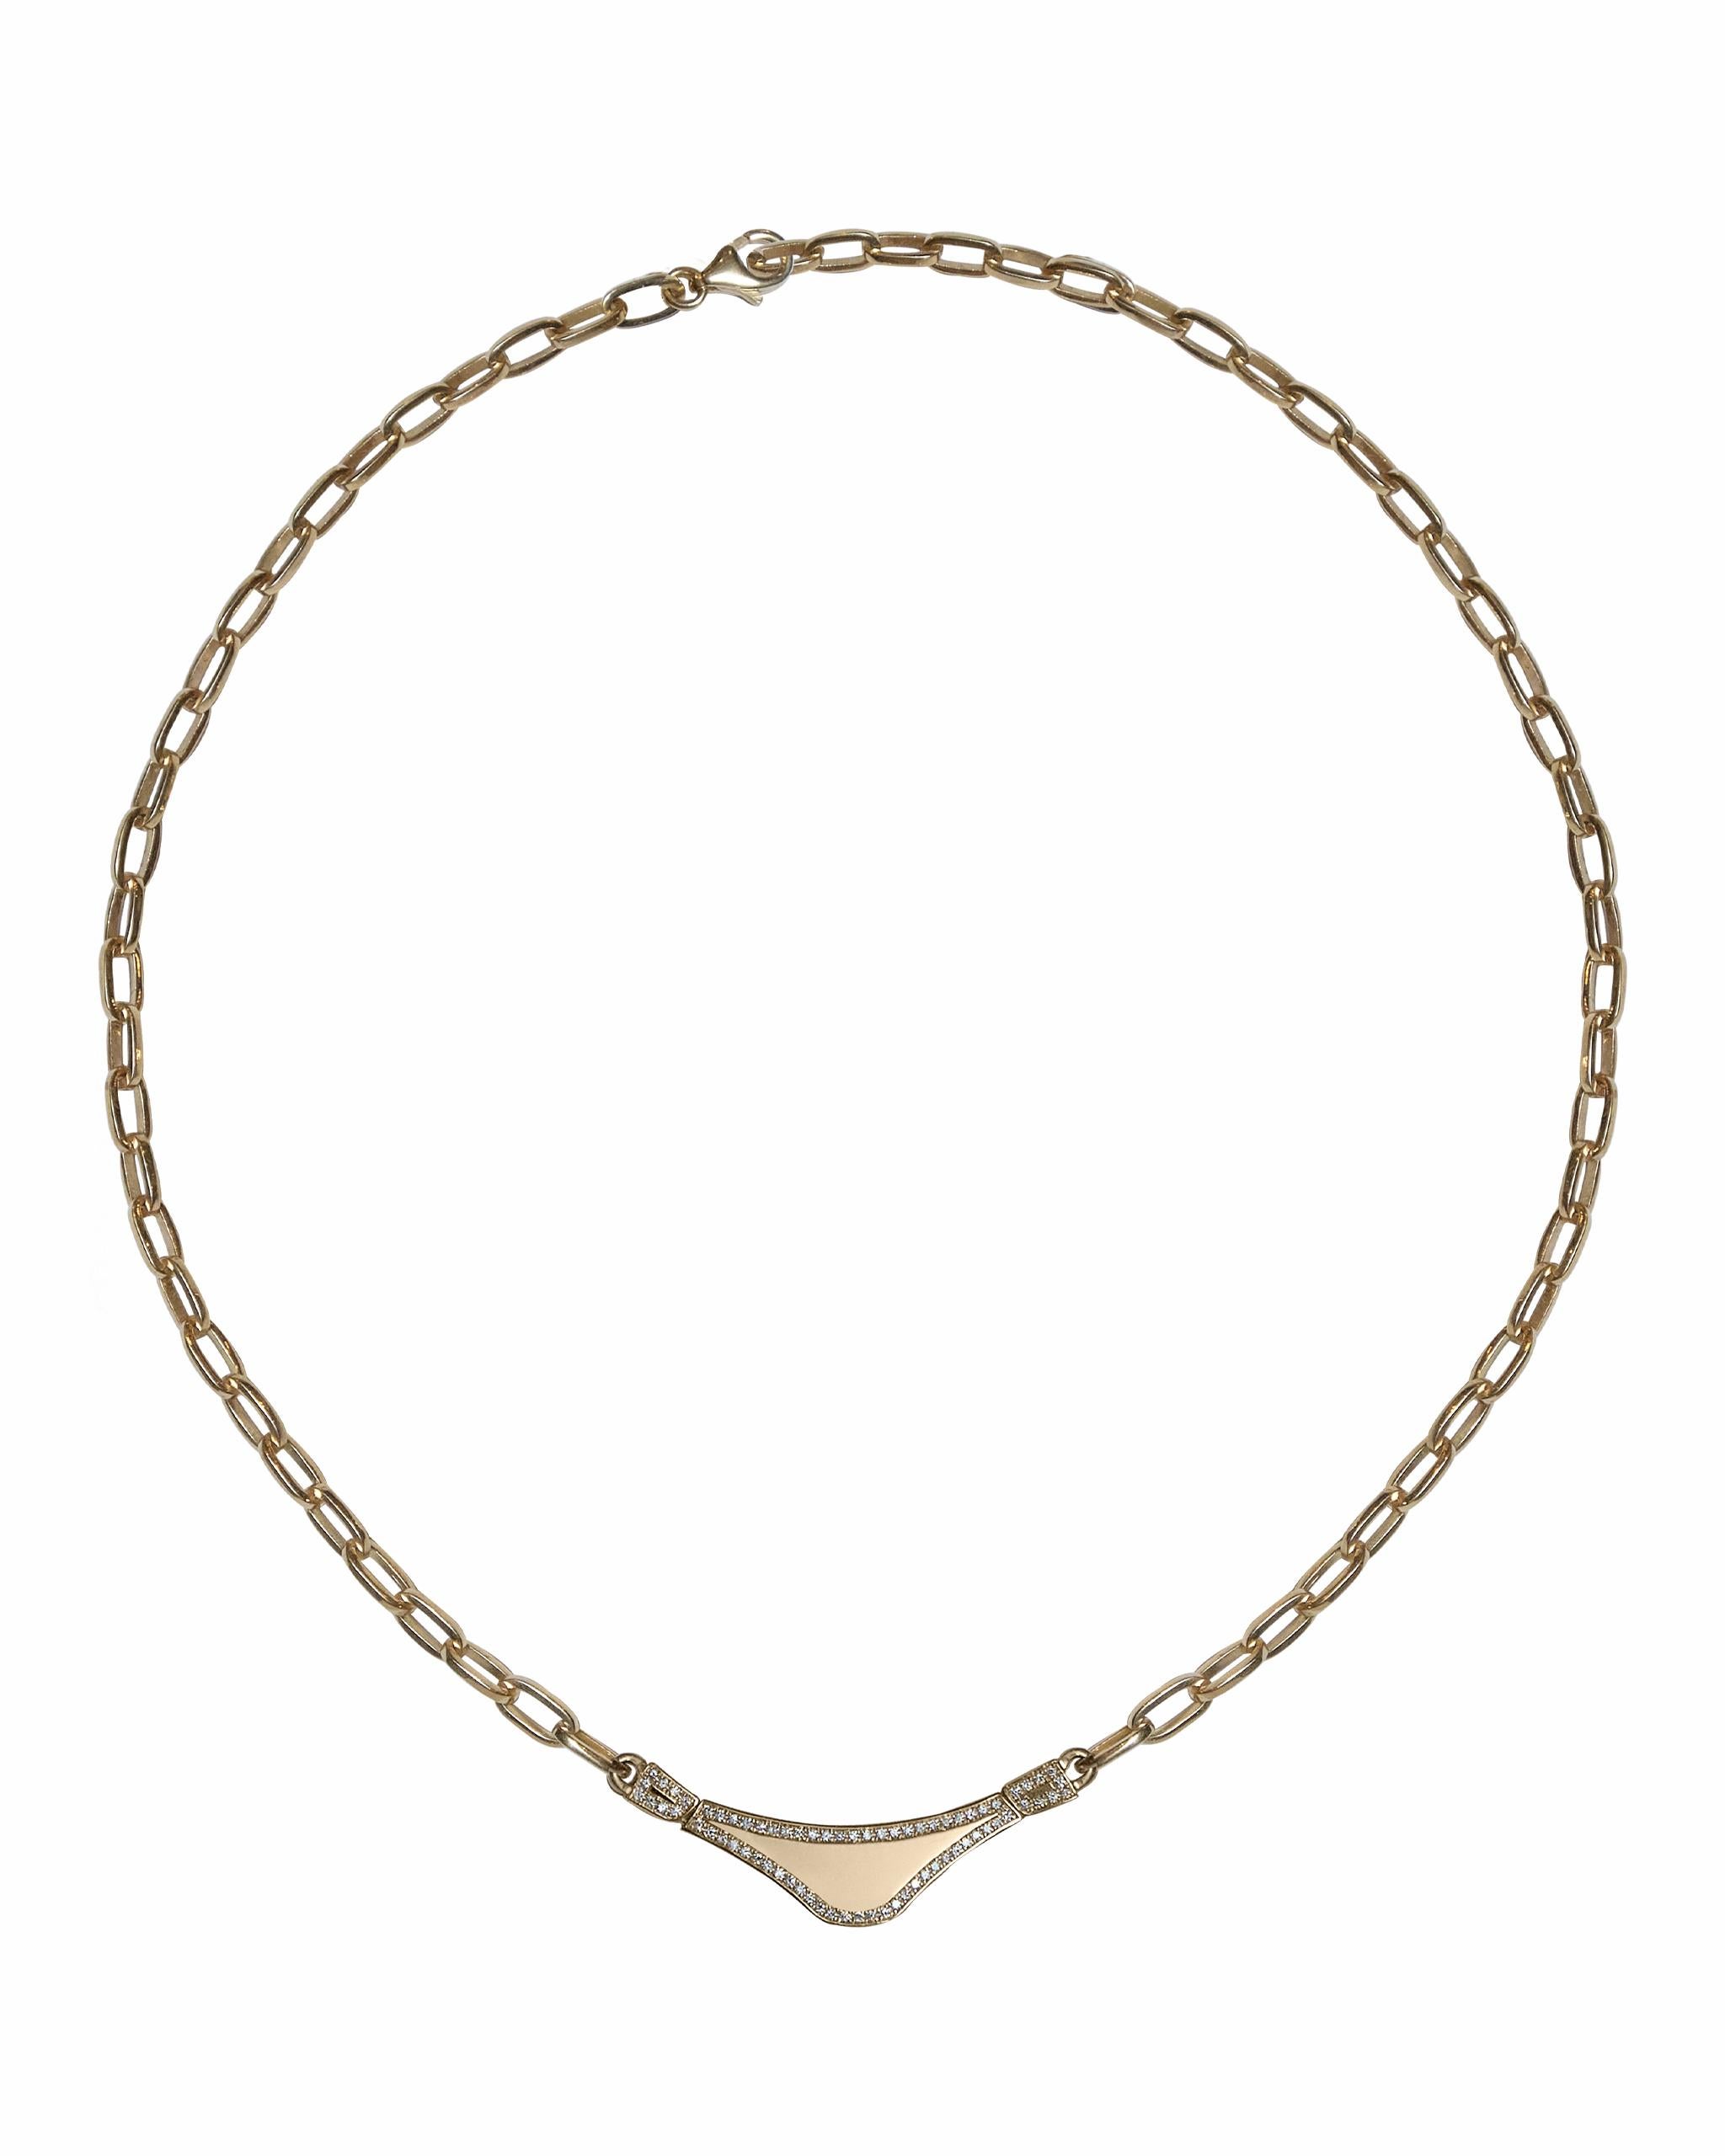 This necklace from POLINA ELLIS' MINOTAVROS collection is handcrafted in 18K raw white gold with 0,37ct white brilliant cut diamonds on a handcrafted 18kt raw white gold chain.
Motif length: 1,50cm Motif width: 1,40cm
Total length: 40cm